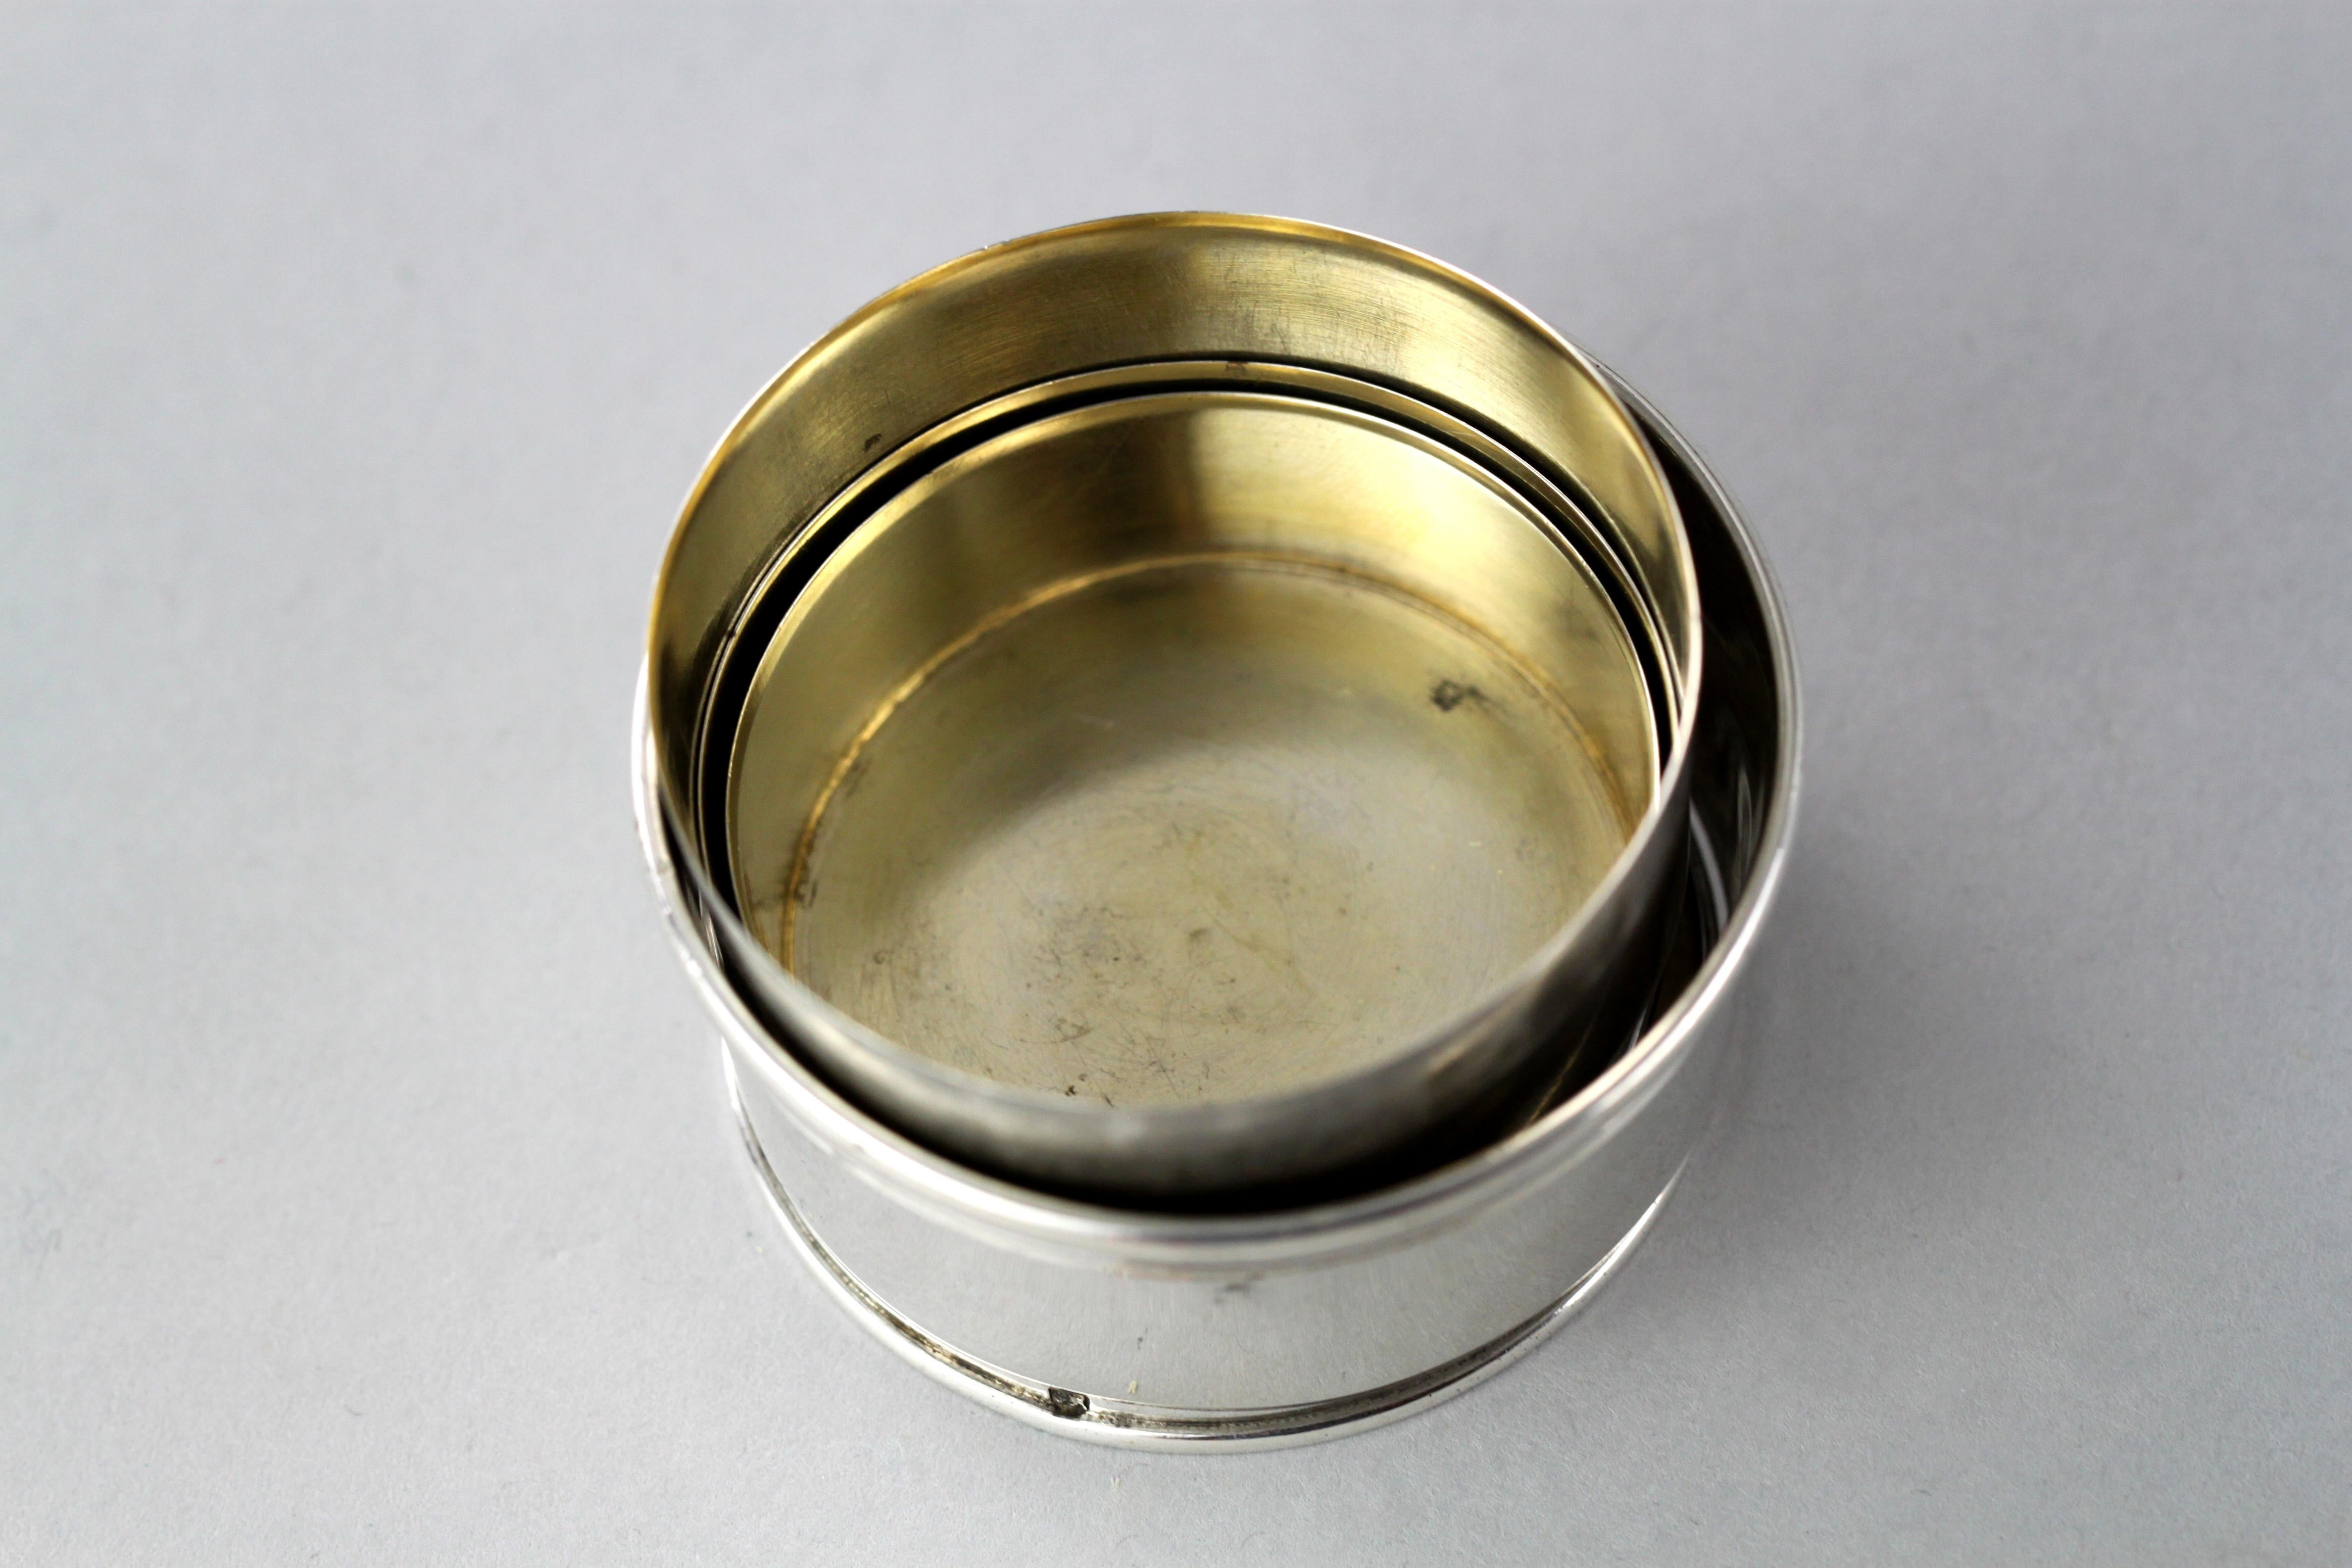 Antique Victorian sterling silver travelling shot/cup
A unique feature, which allows the cup to be portable by sliding up and down. Very useful as it is ideal for travelling.
Maker: W Leuchars,
Made in London 1886
Fully hallmarked.

Dimensions